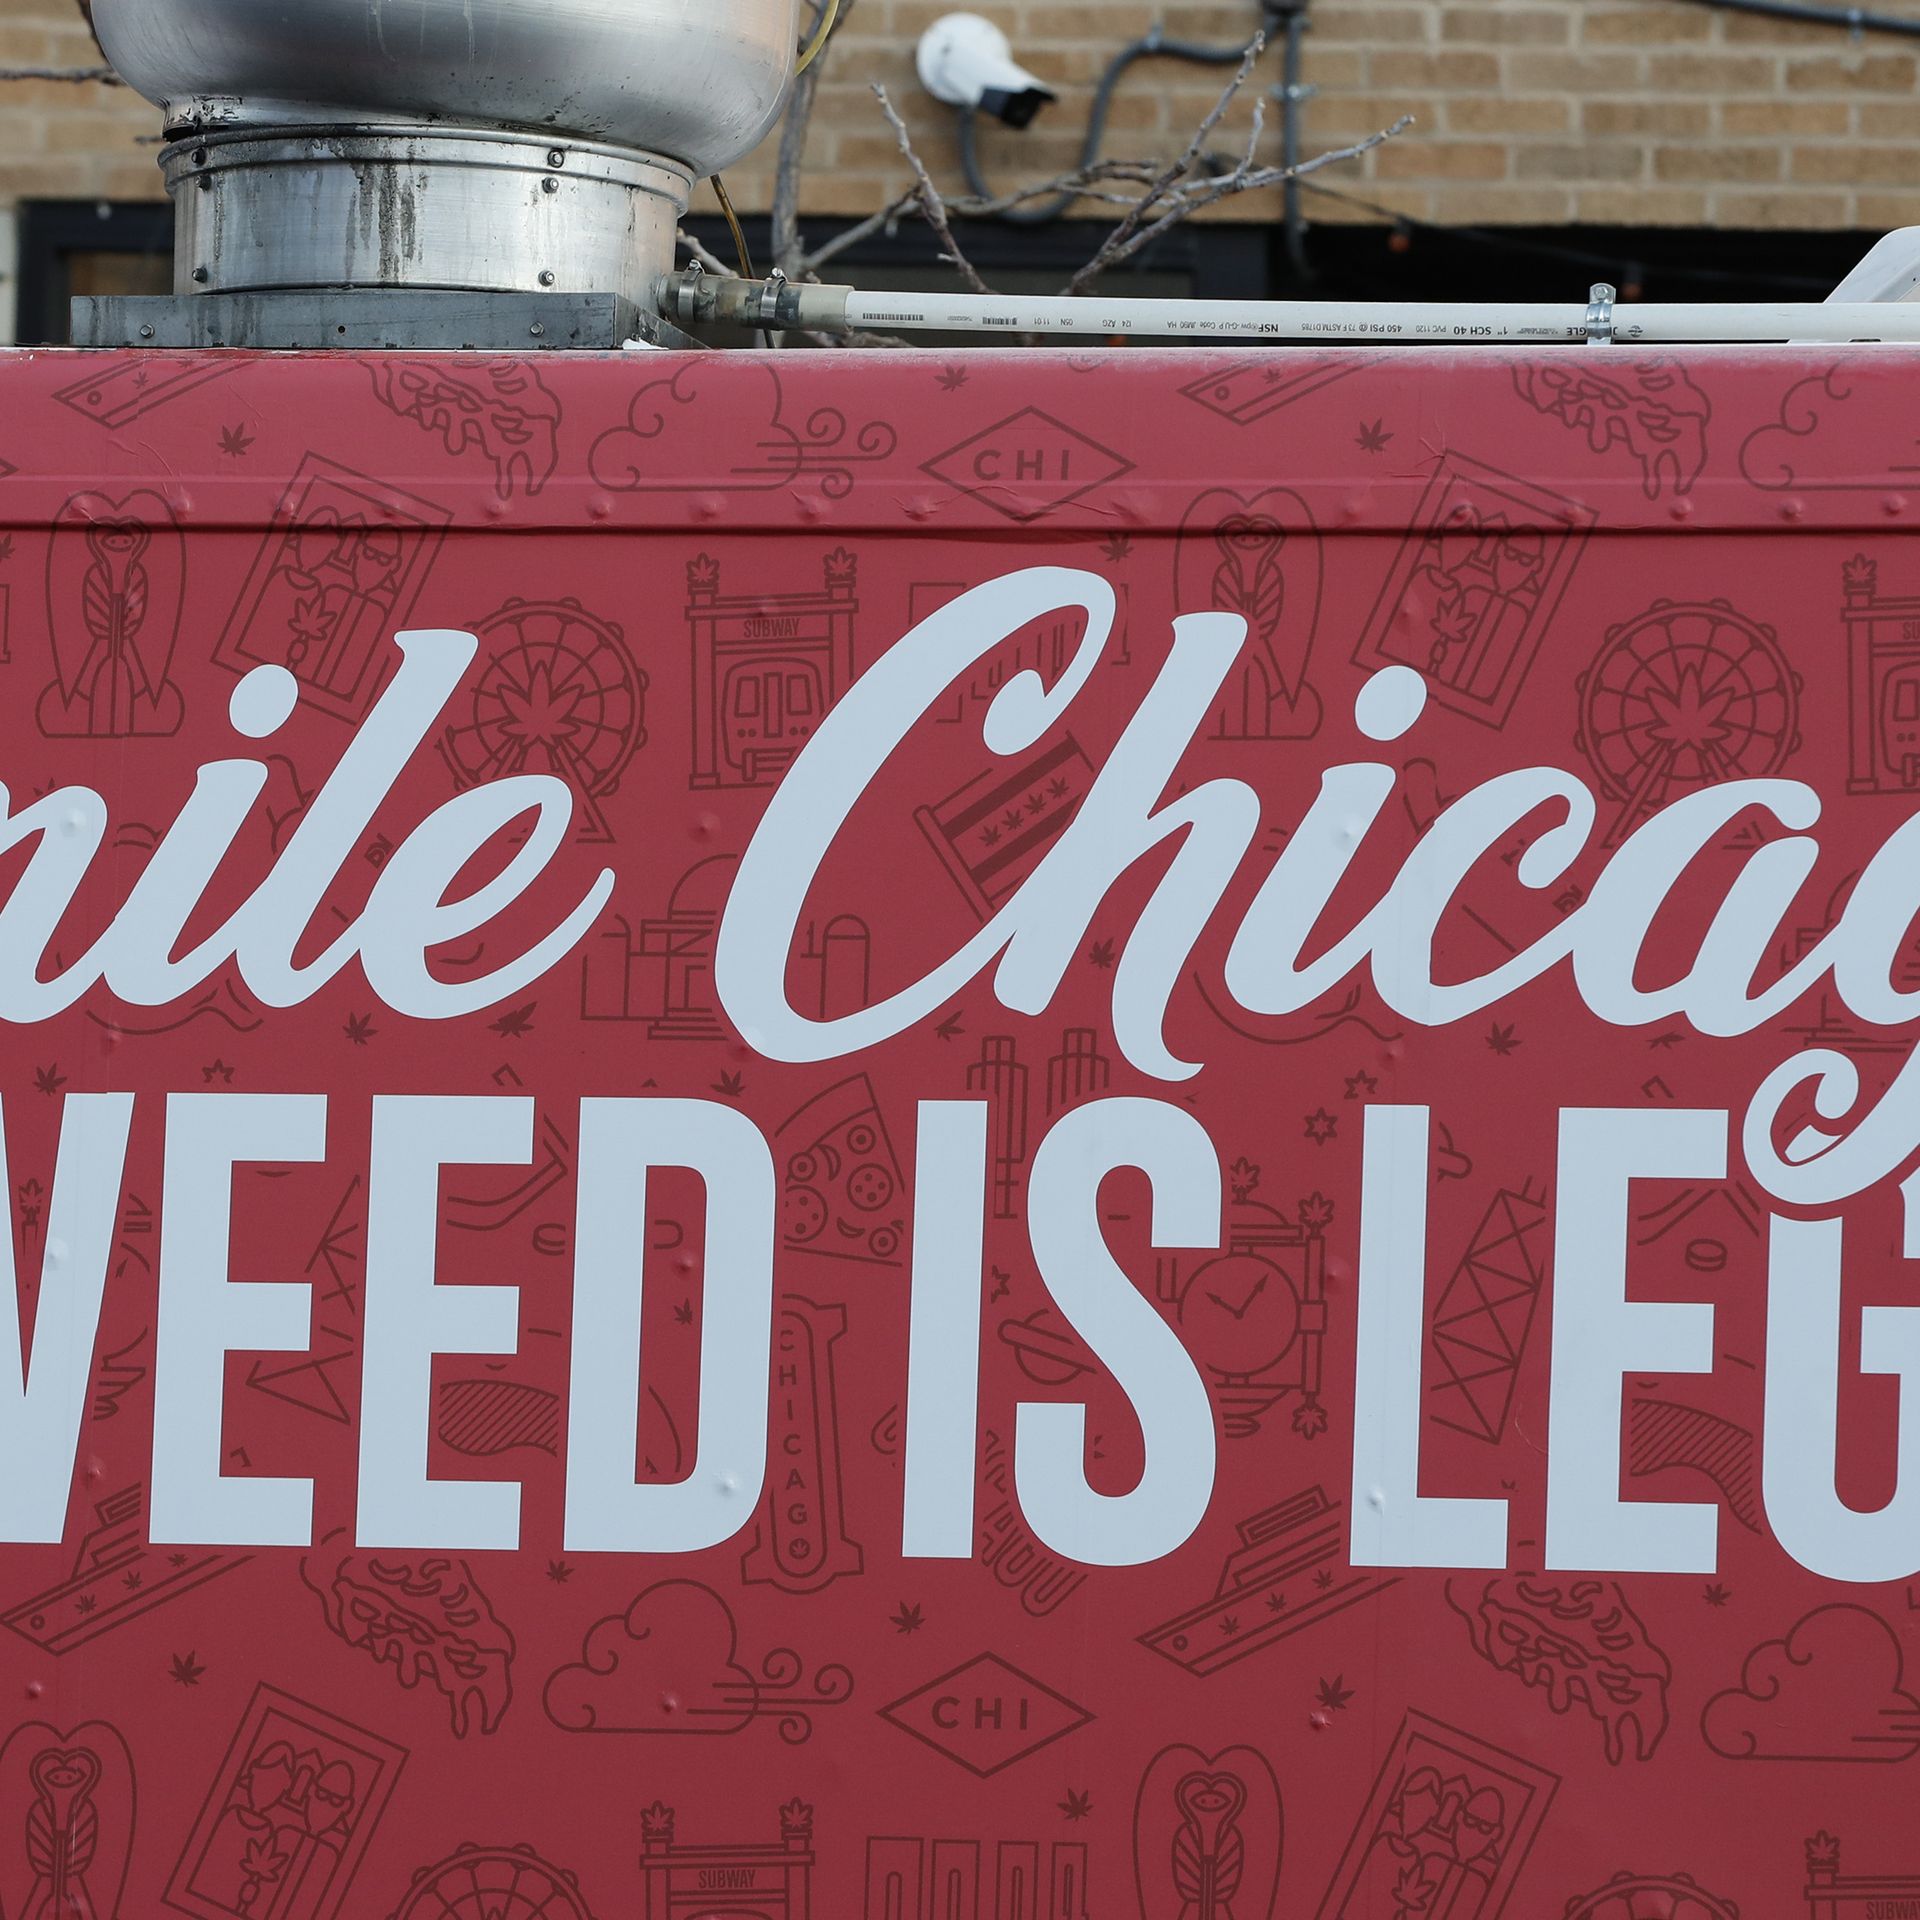 Photo of a sign that says "Smile Chicago, Weed is Legal" 